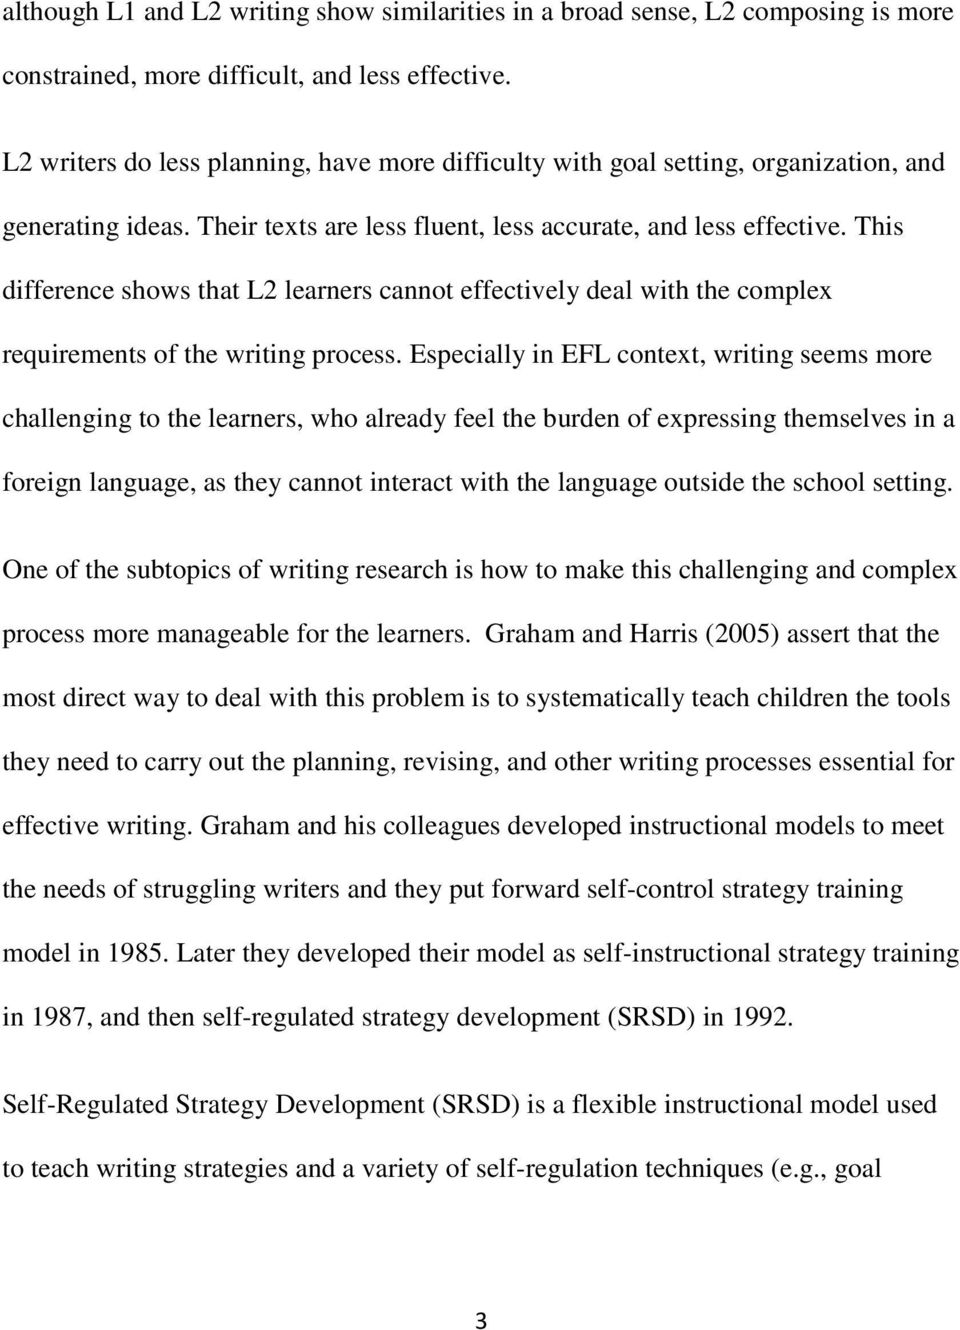 This difference shows that L2 learners cannot effectively deal with the complex requirements of the writing process.